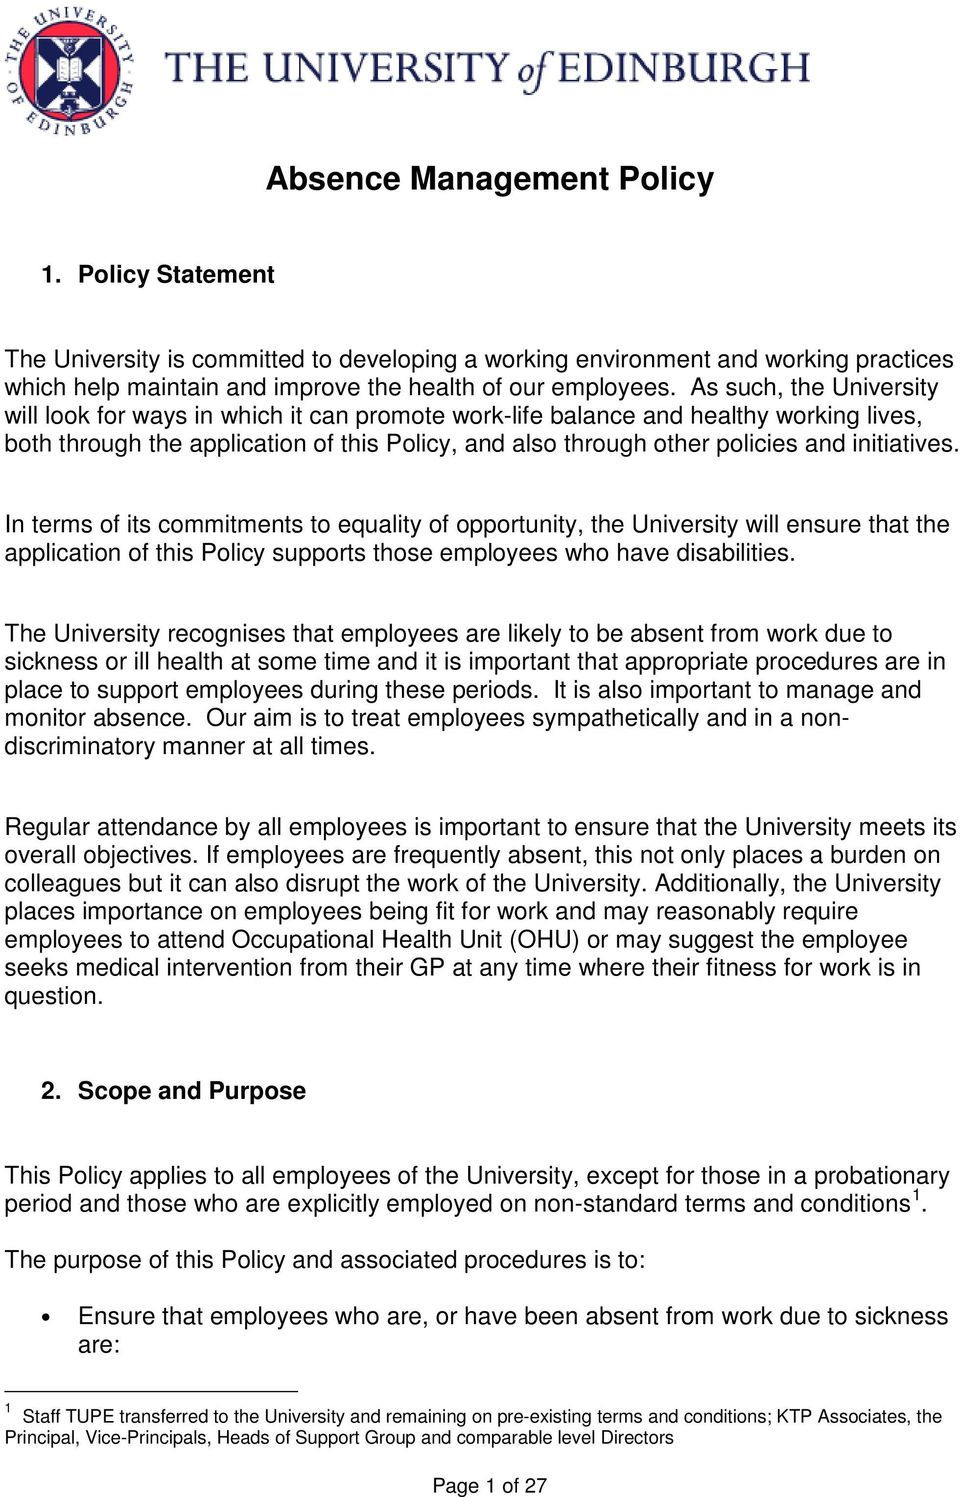 initiatives. In terms of its commitments to equality of opportunity, the University will ensure that the application of this Policy supports those employees who have disabilities.